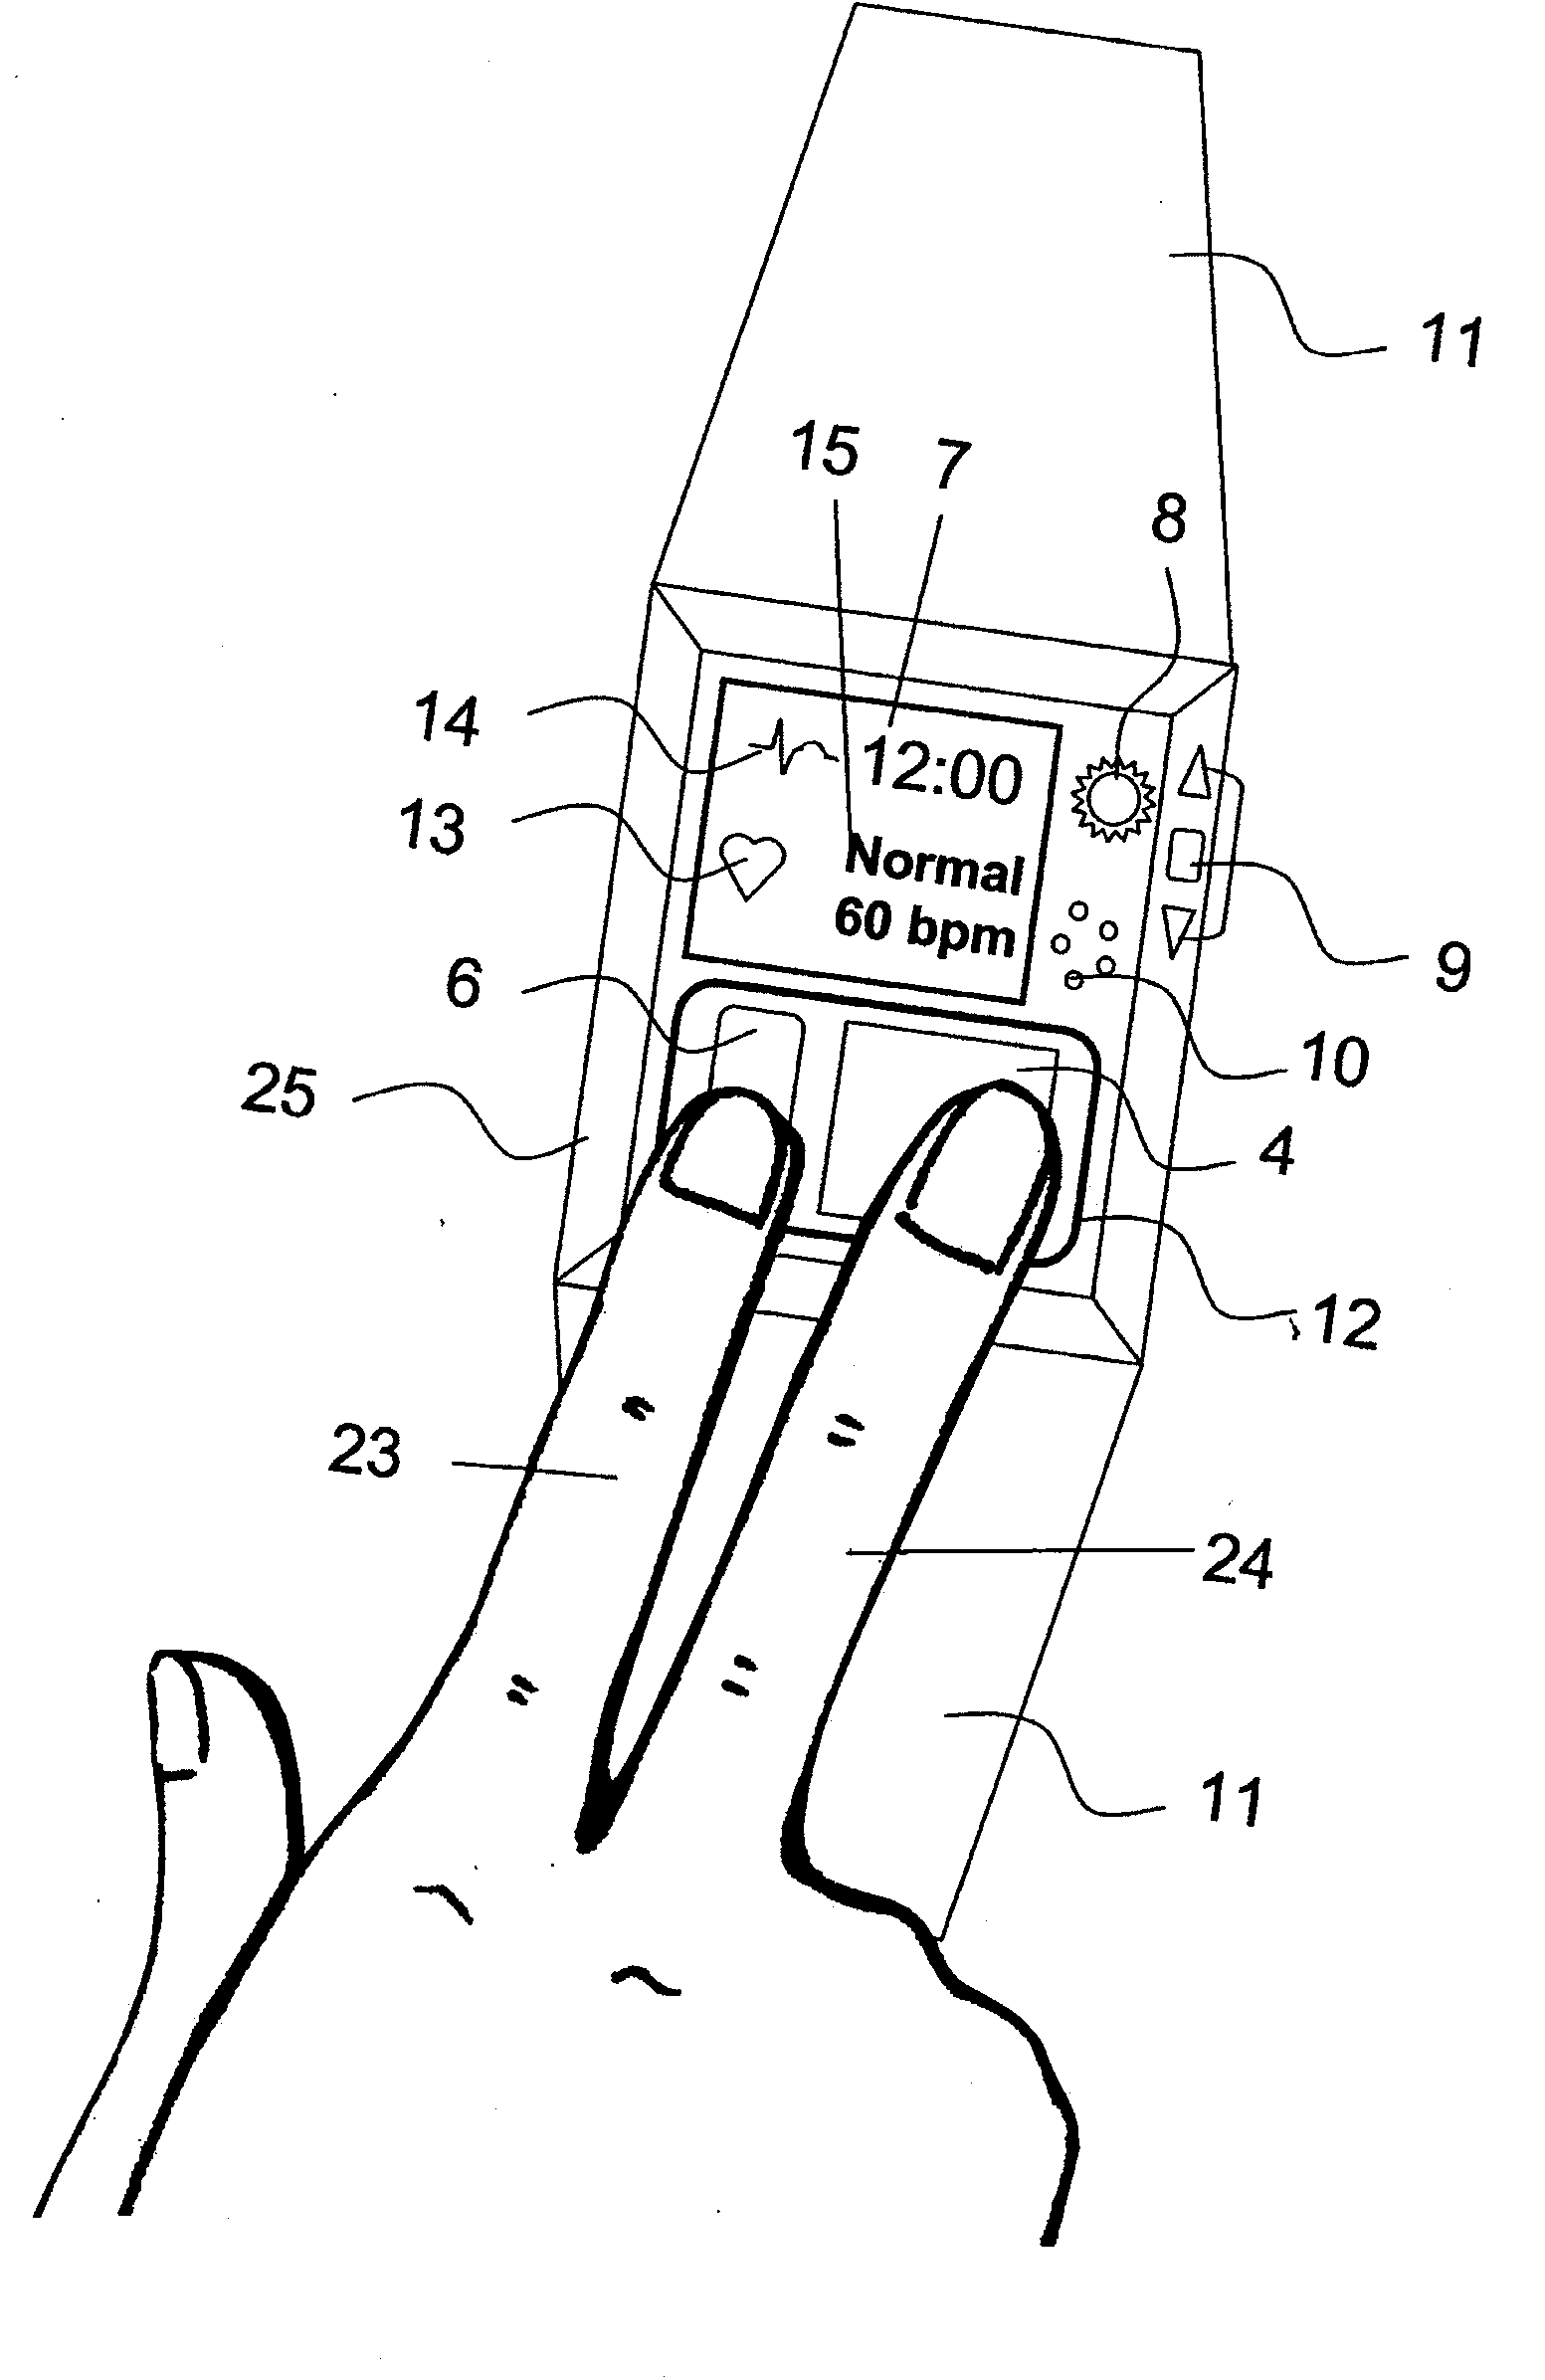 Device and Method for Measuring Three-Lead ECG in a Wristwatch